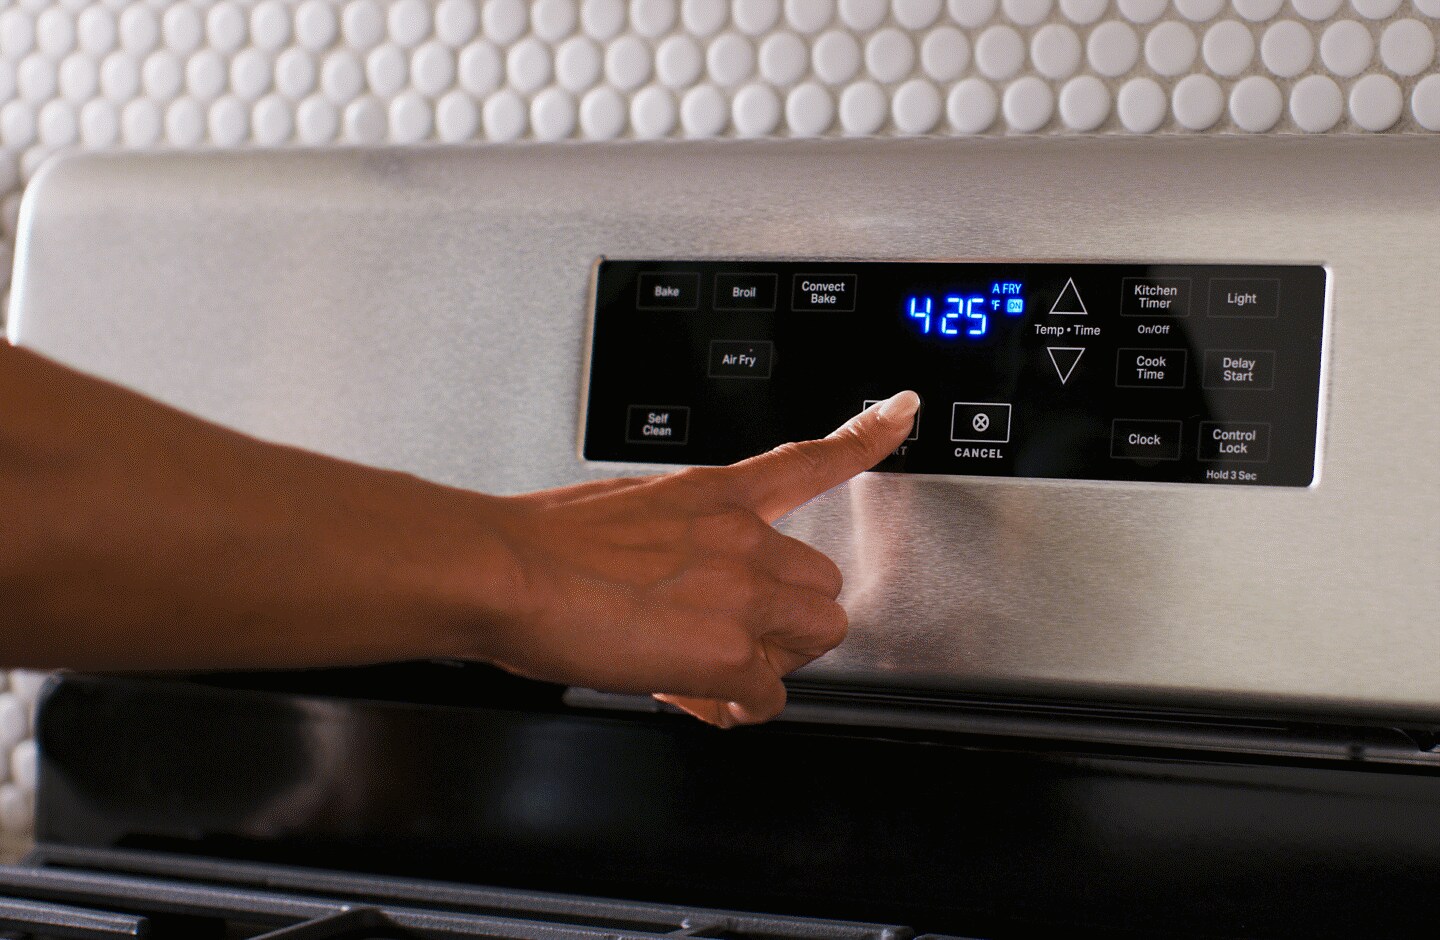 How To Fix The Error Code F2-E5 For Maytag Oven